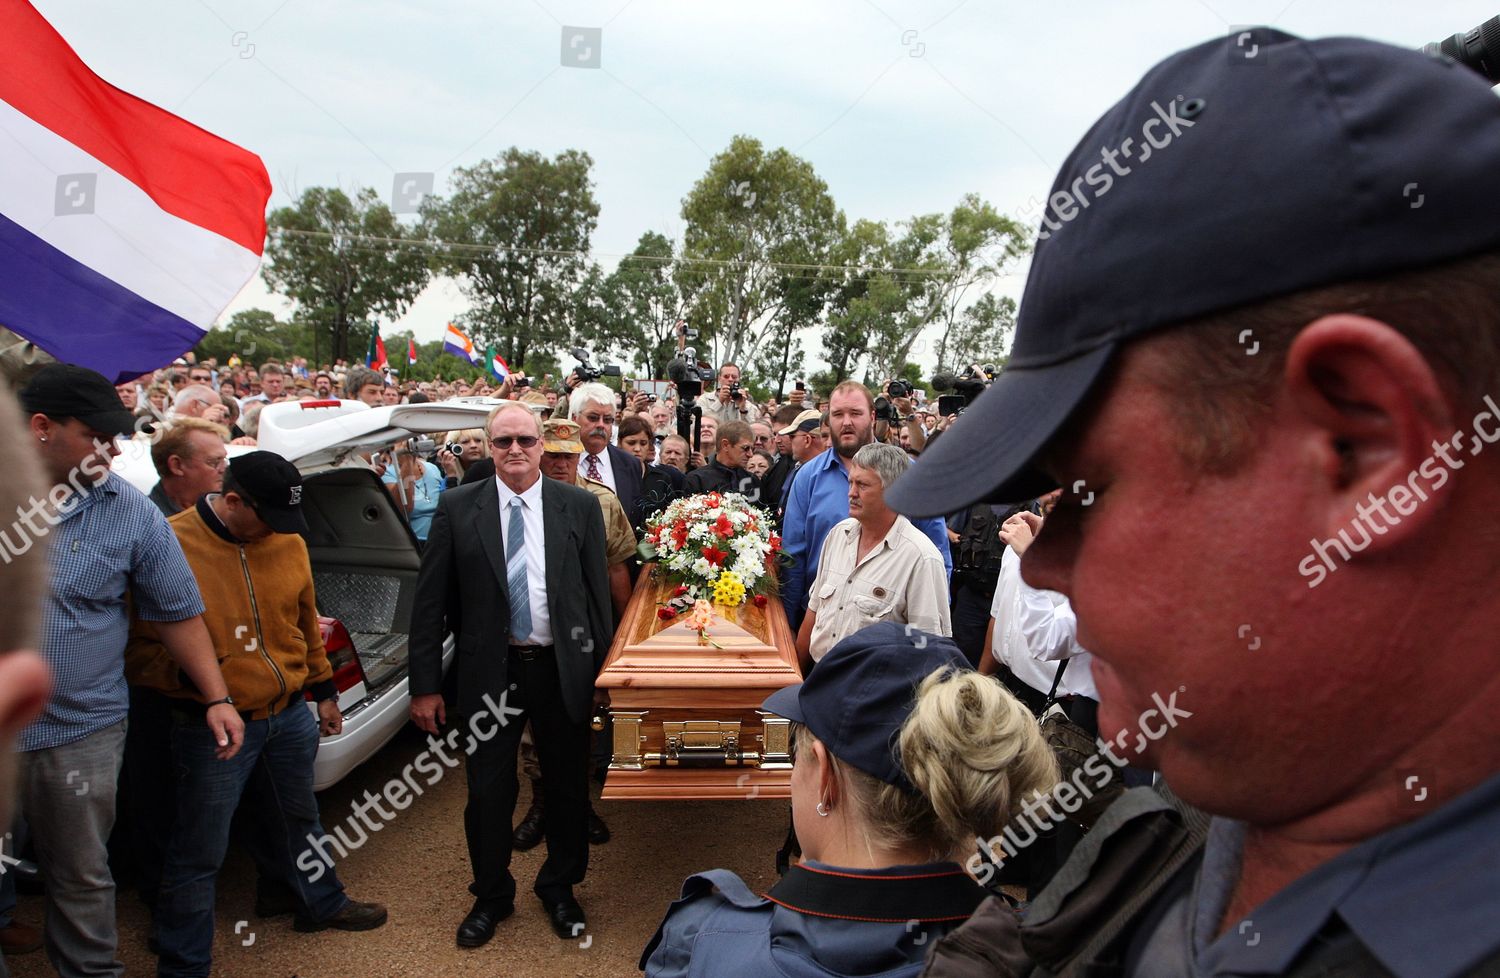 AWB leader Eugene Terreblanche's funeral in Ventersdorp, South Africa, in  pictures